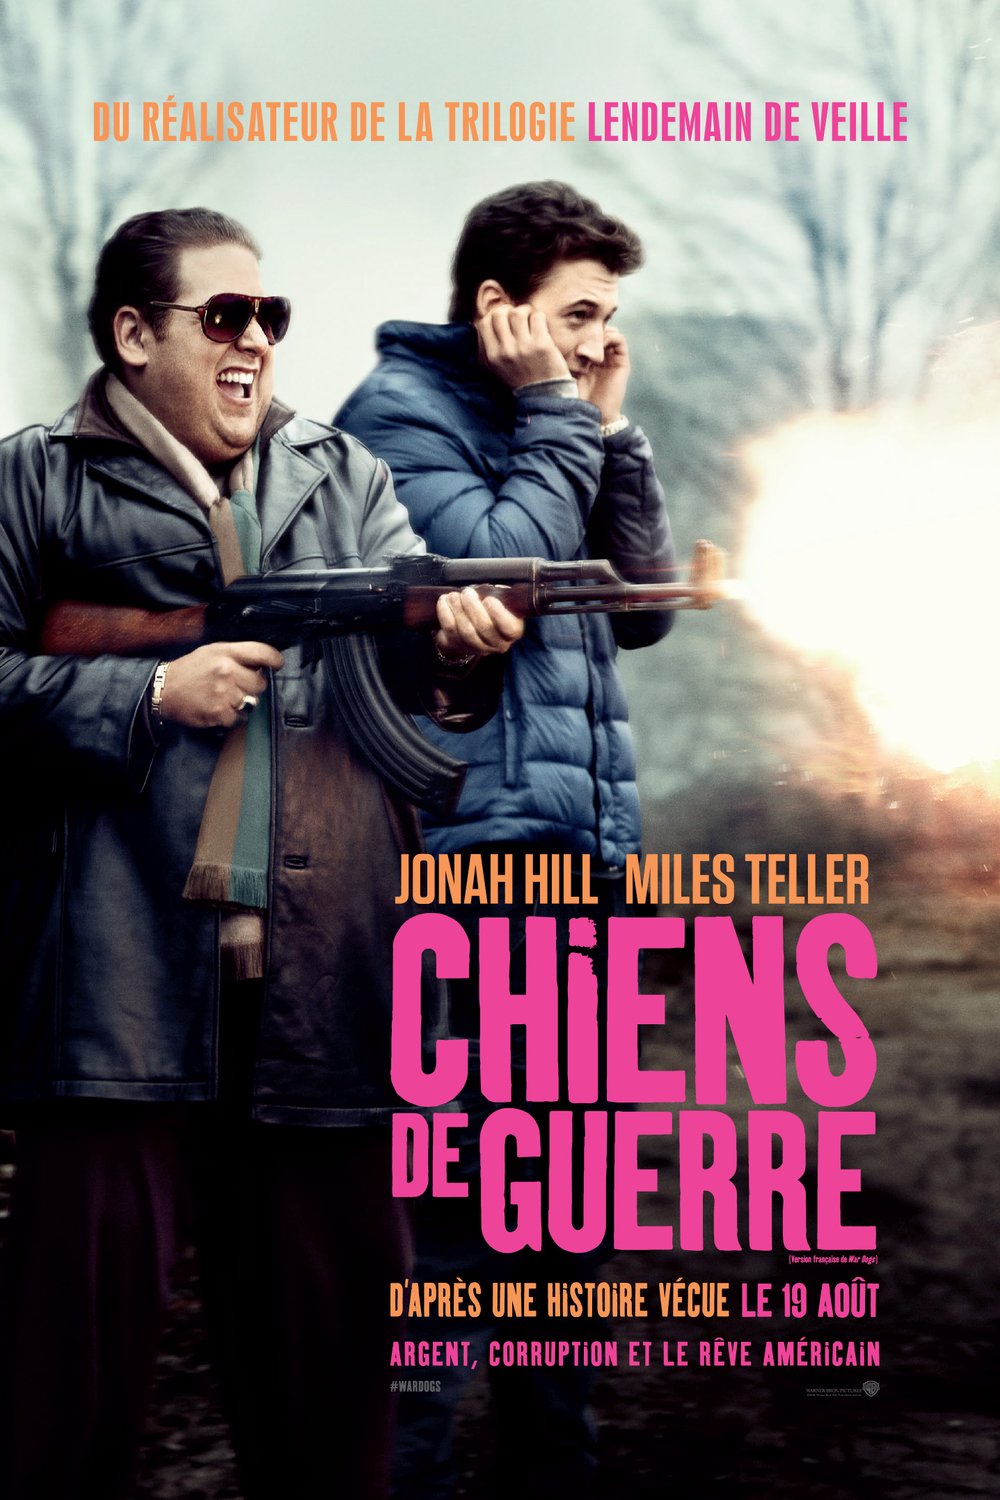 Poster of the movie Chiens de guerre